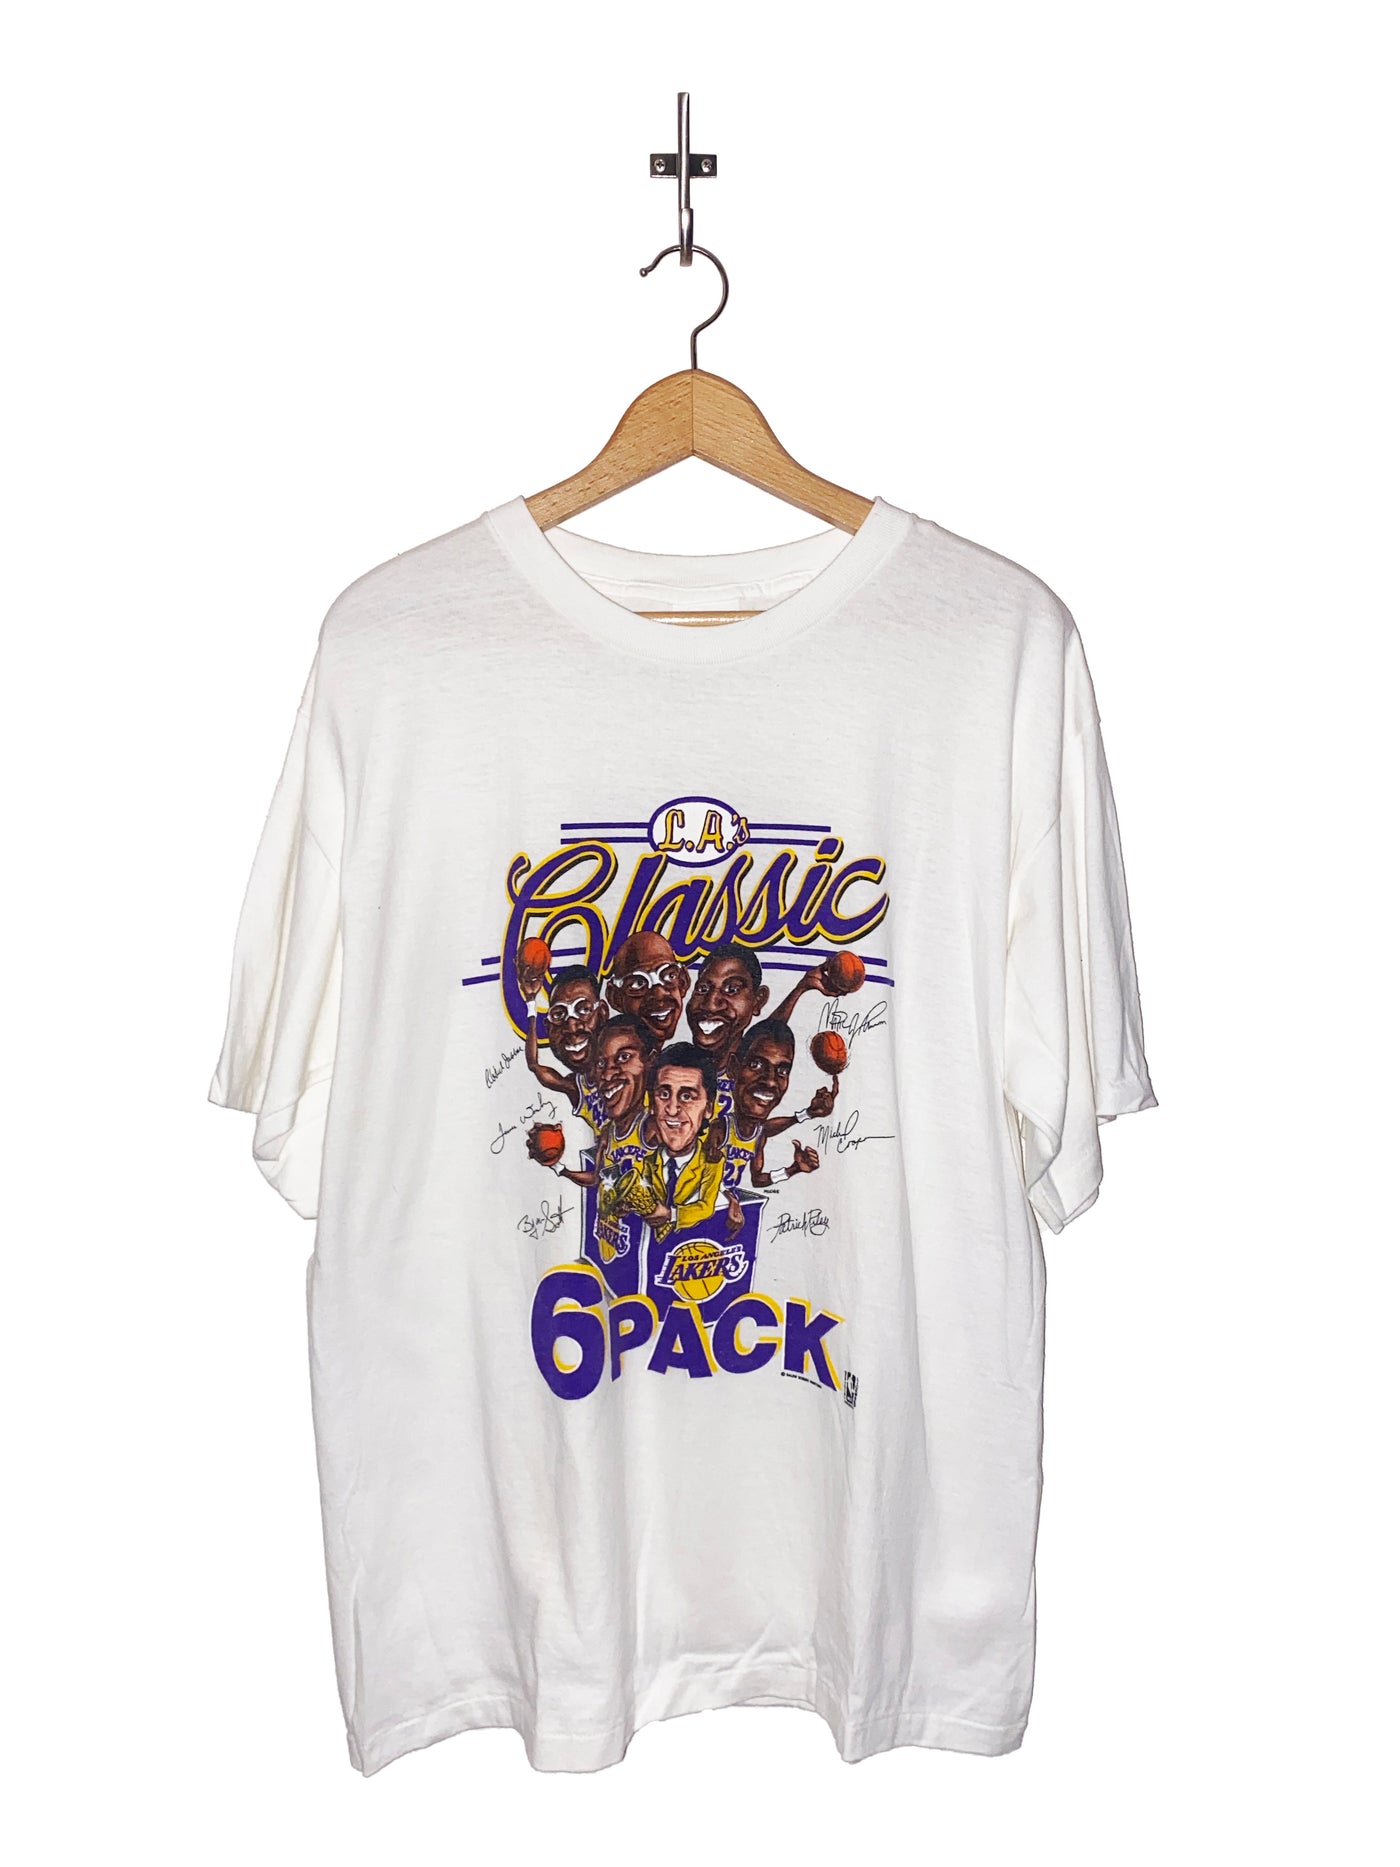 Vintage 1988 Lakers Classic 6 Pack T-Shirt